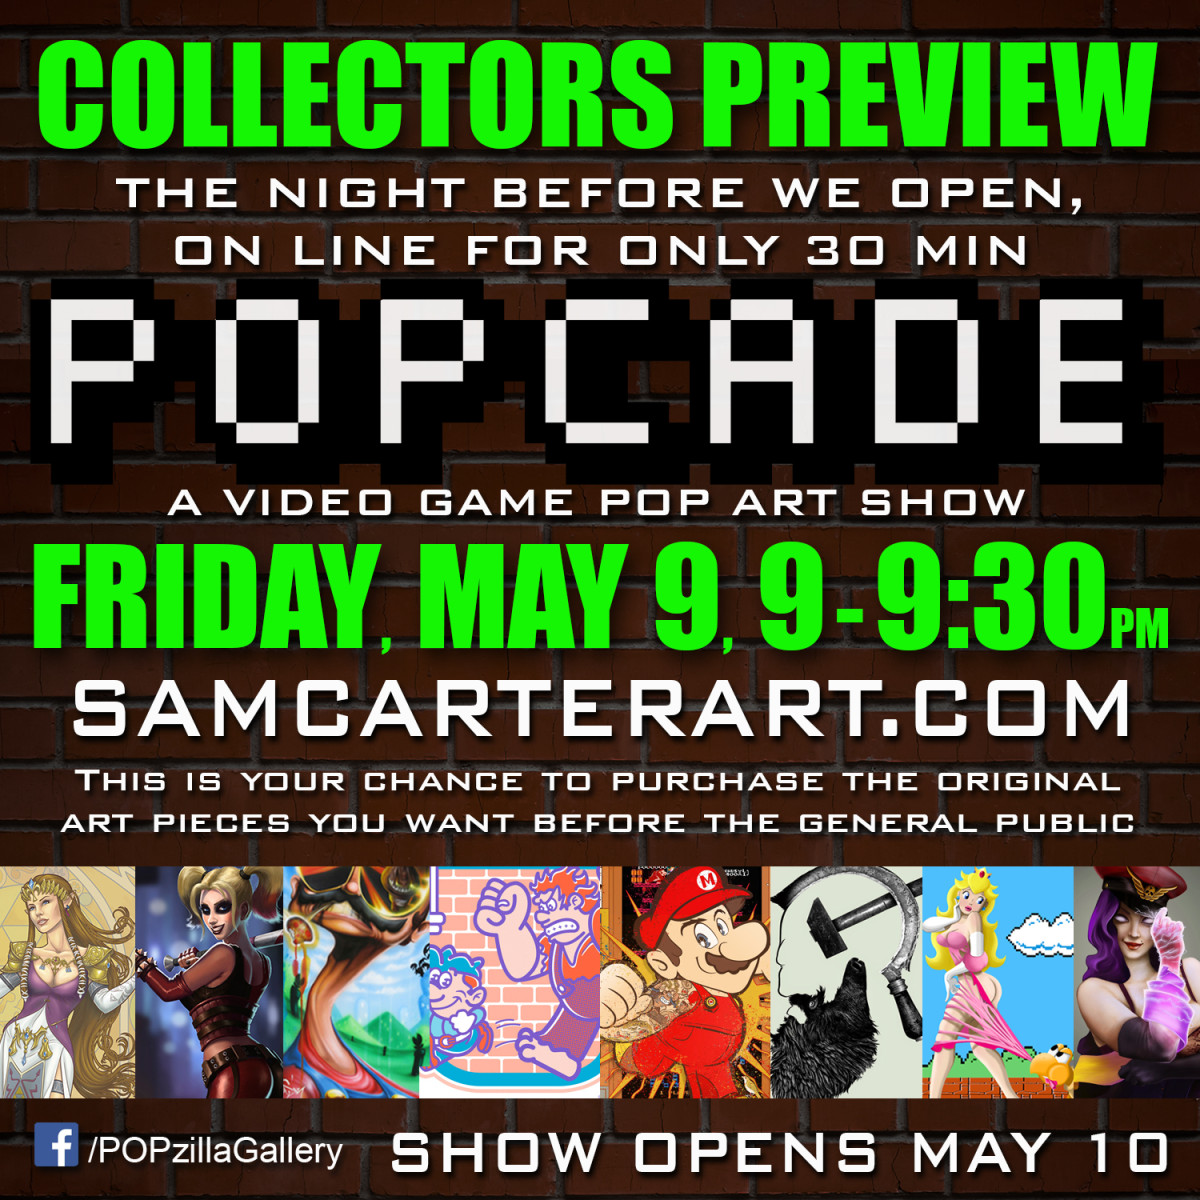 Collectors Preview